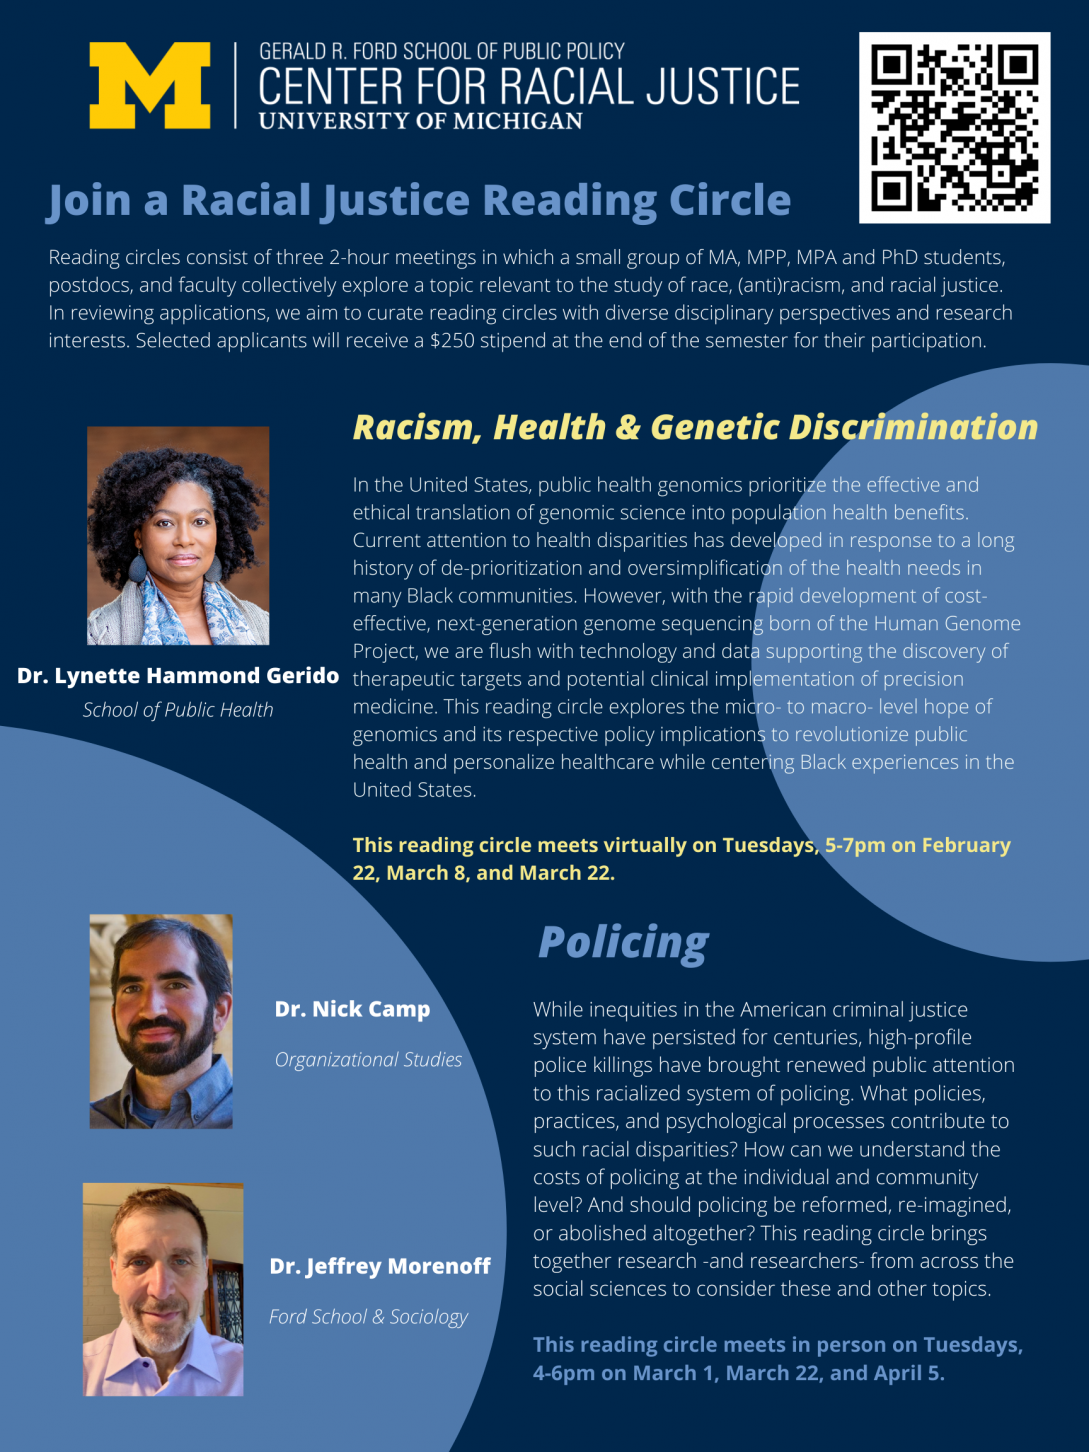 Reading Circle on Racism, Health & Genetic Discrimination 